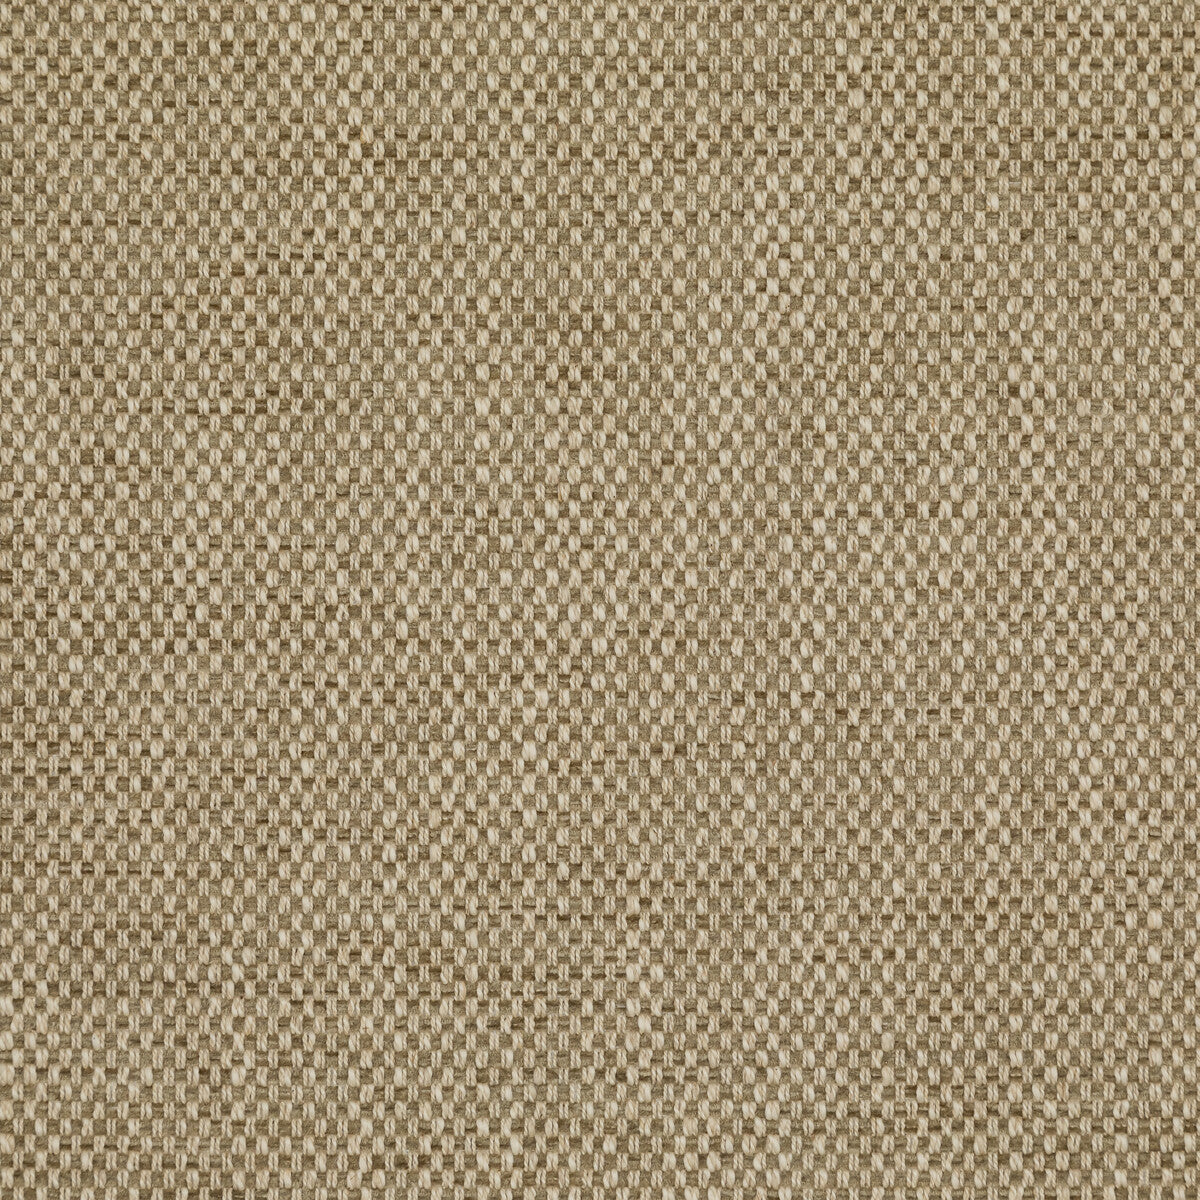 Carlton fabric in hemp color - pattern BFC-3692.106.0 - by Lee Jofa in the Blithfield collection